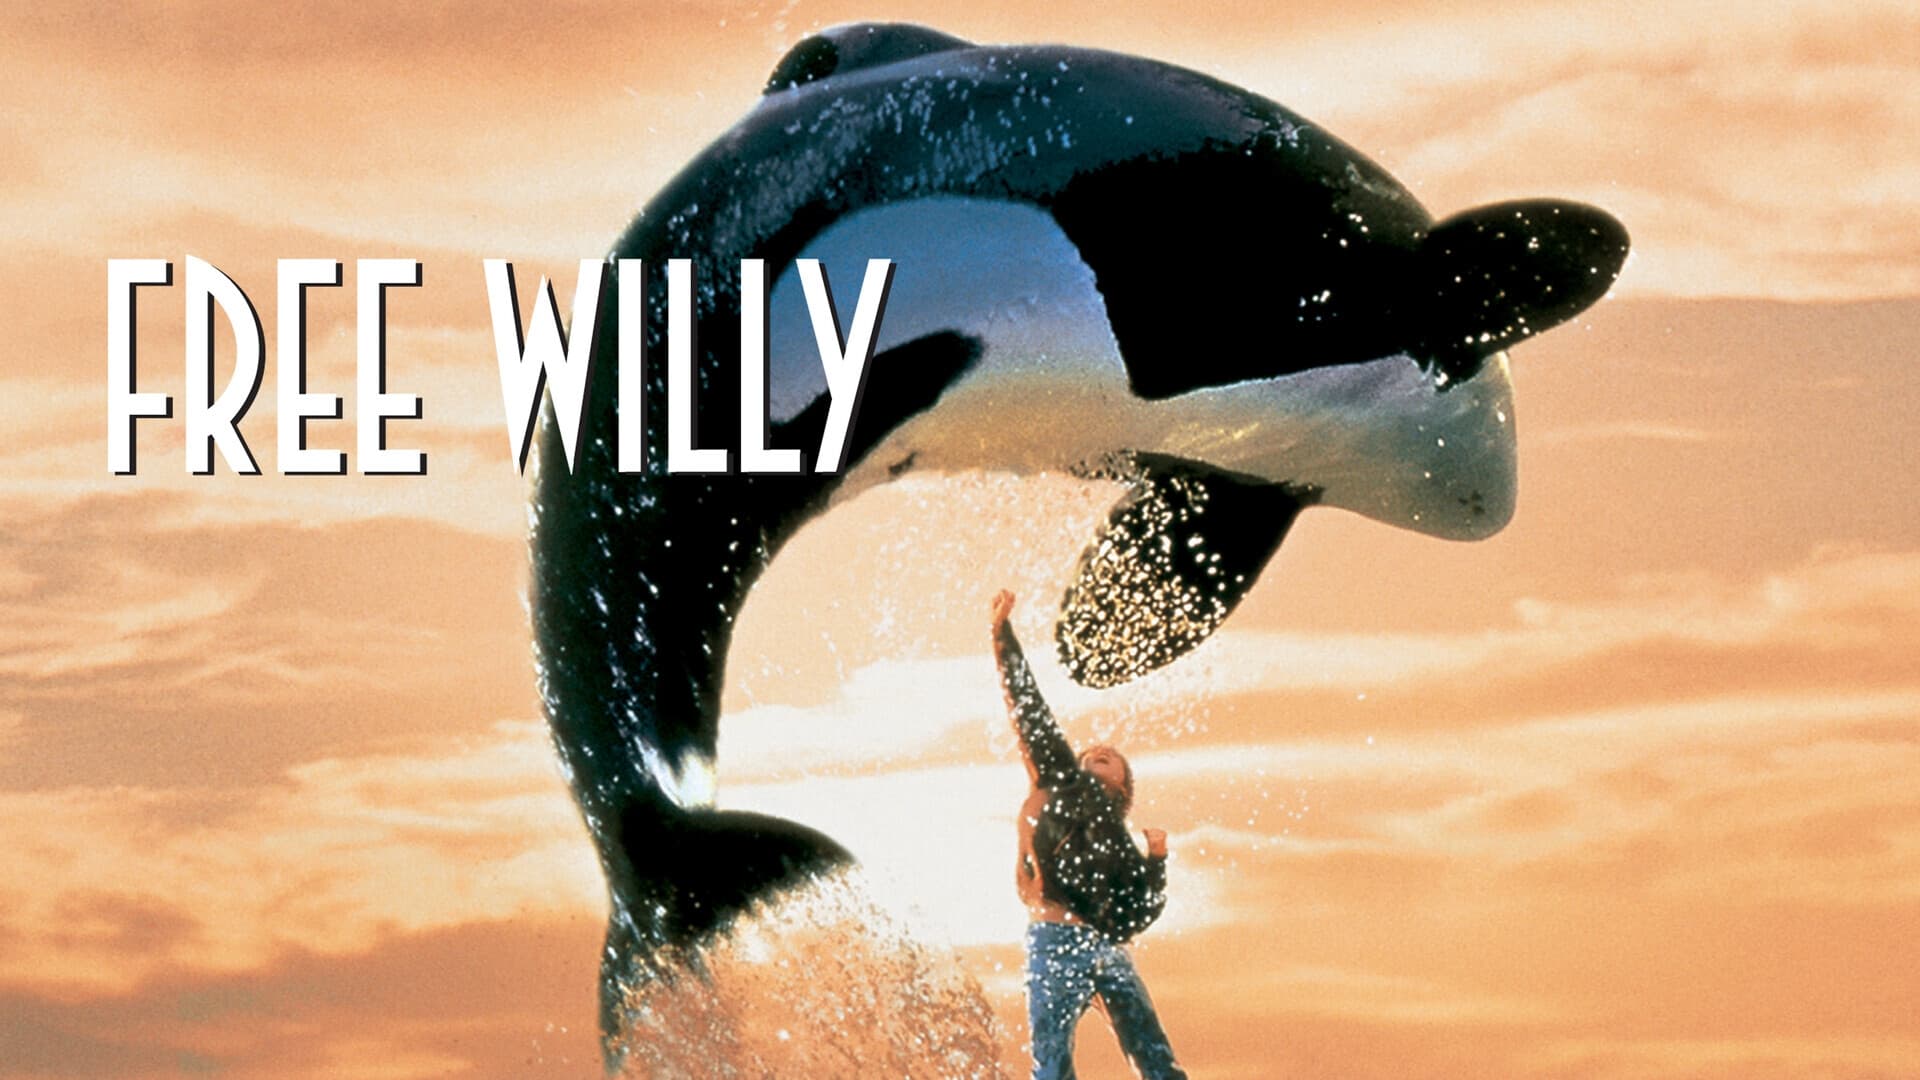 Free Willy - Pelastakaa Willy (1993)